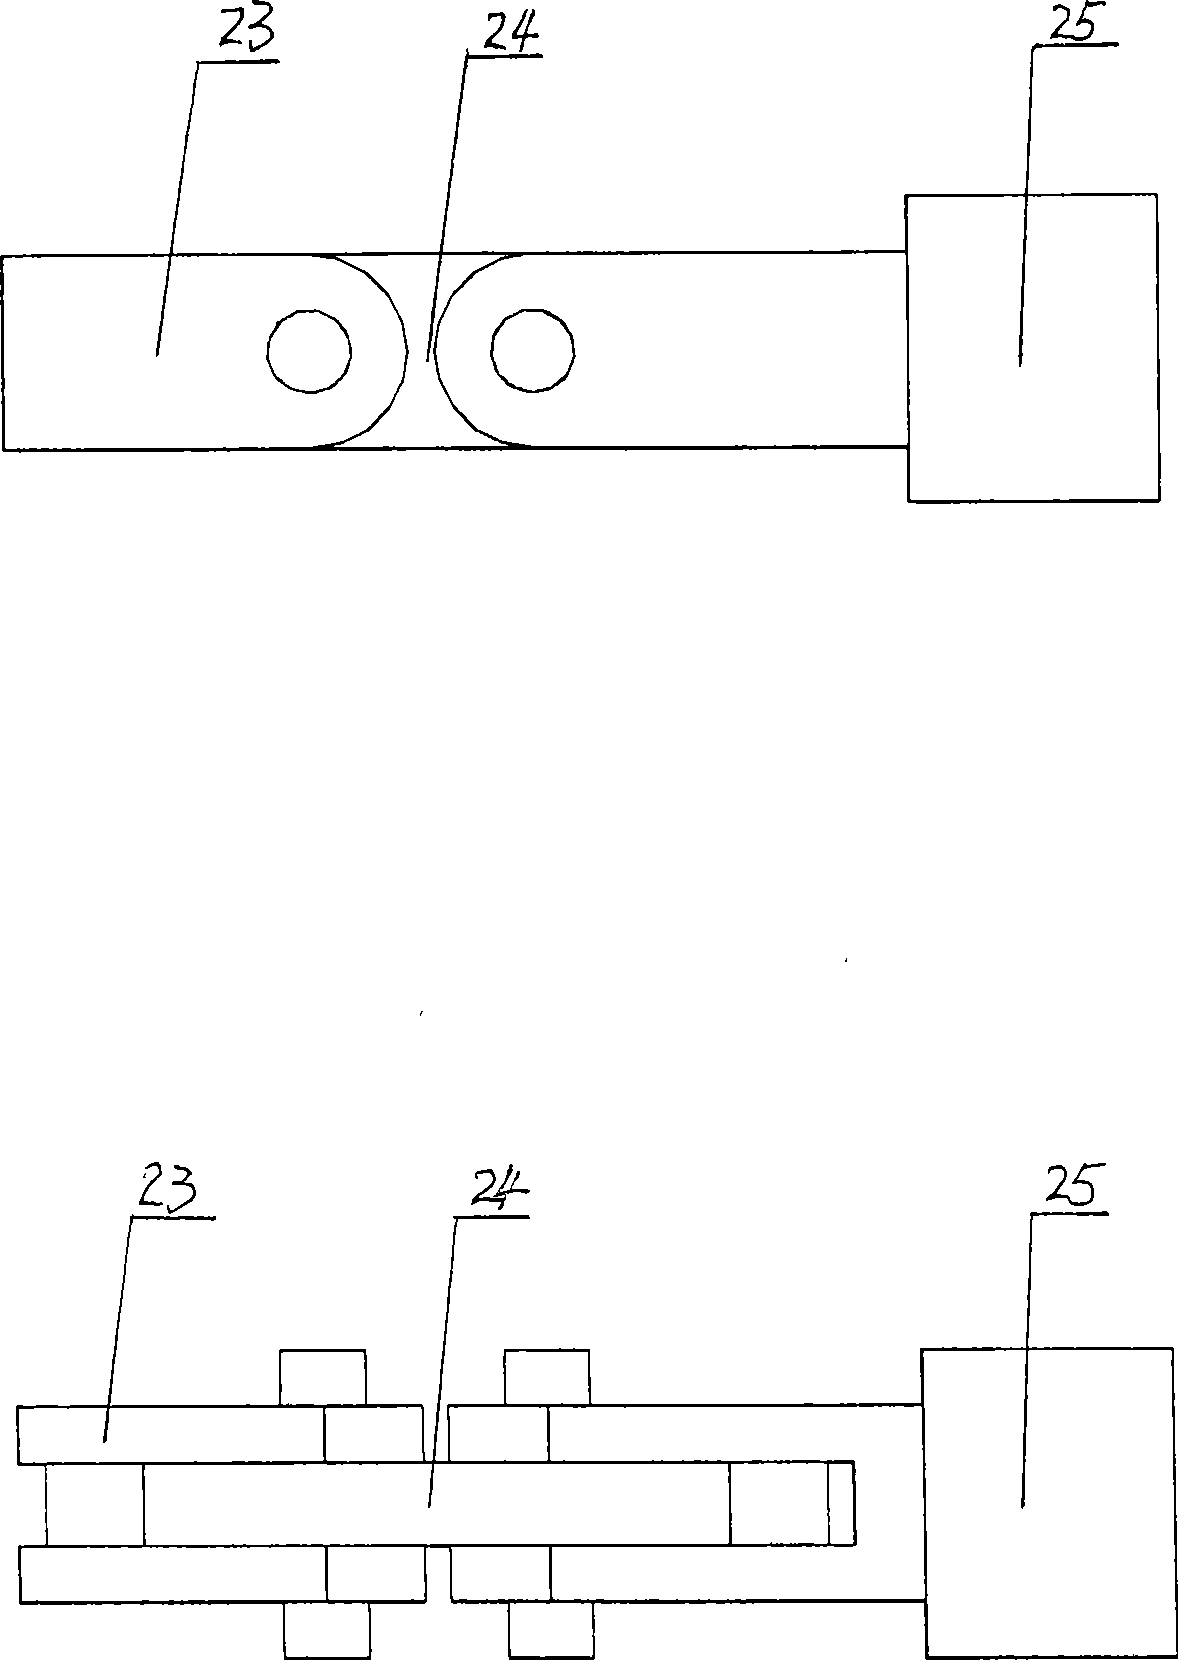 Hydraulic bracket with interconnected top and bottom